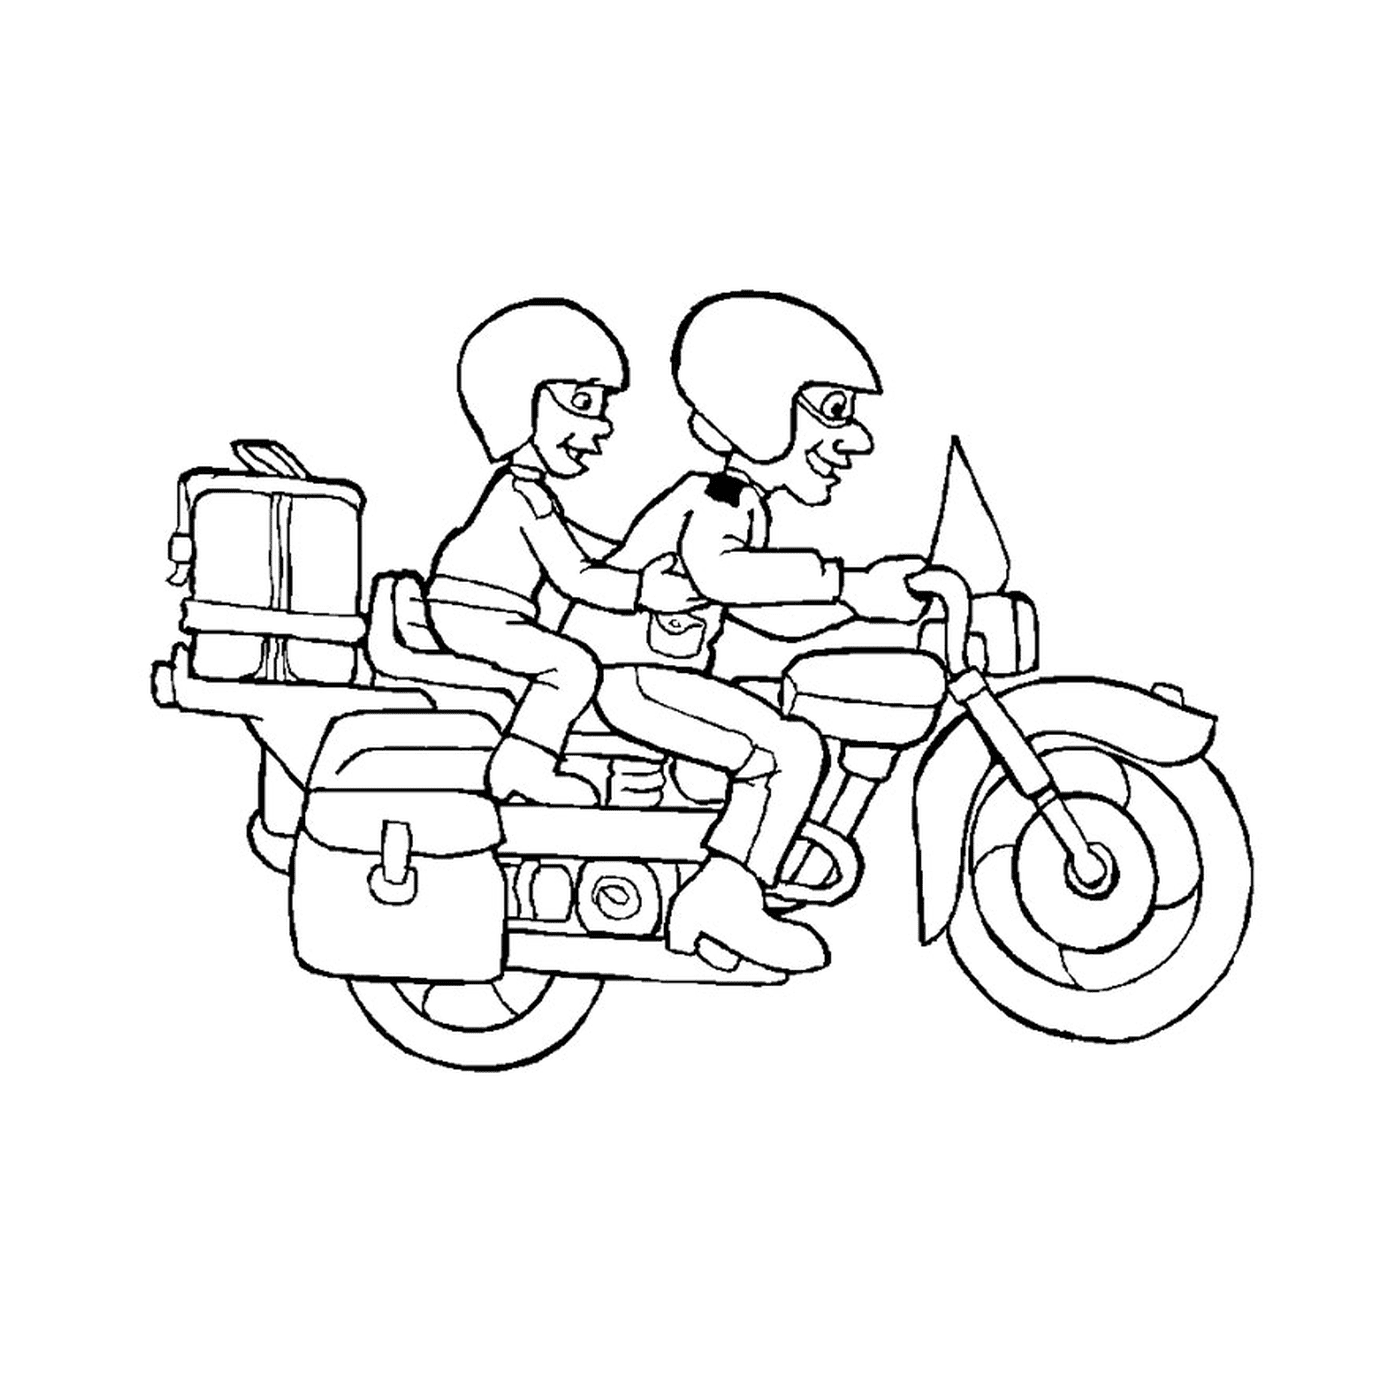  two people on motorcycles 